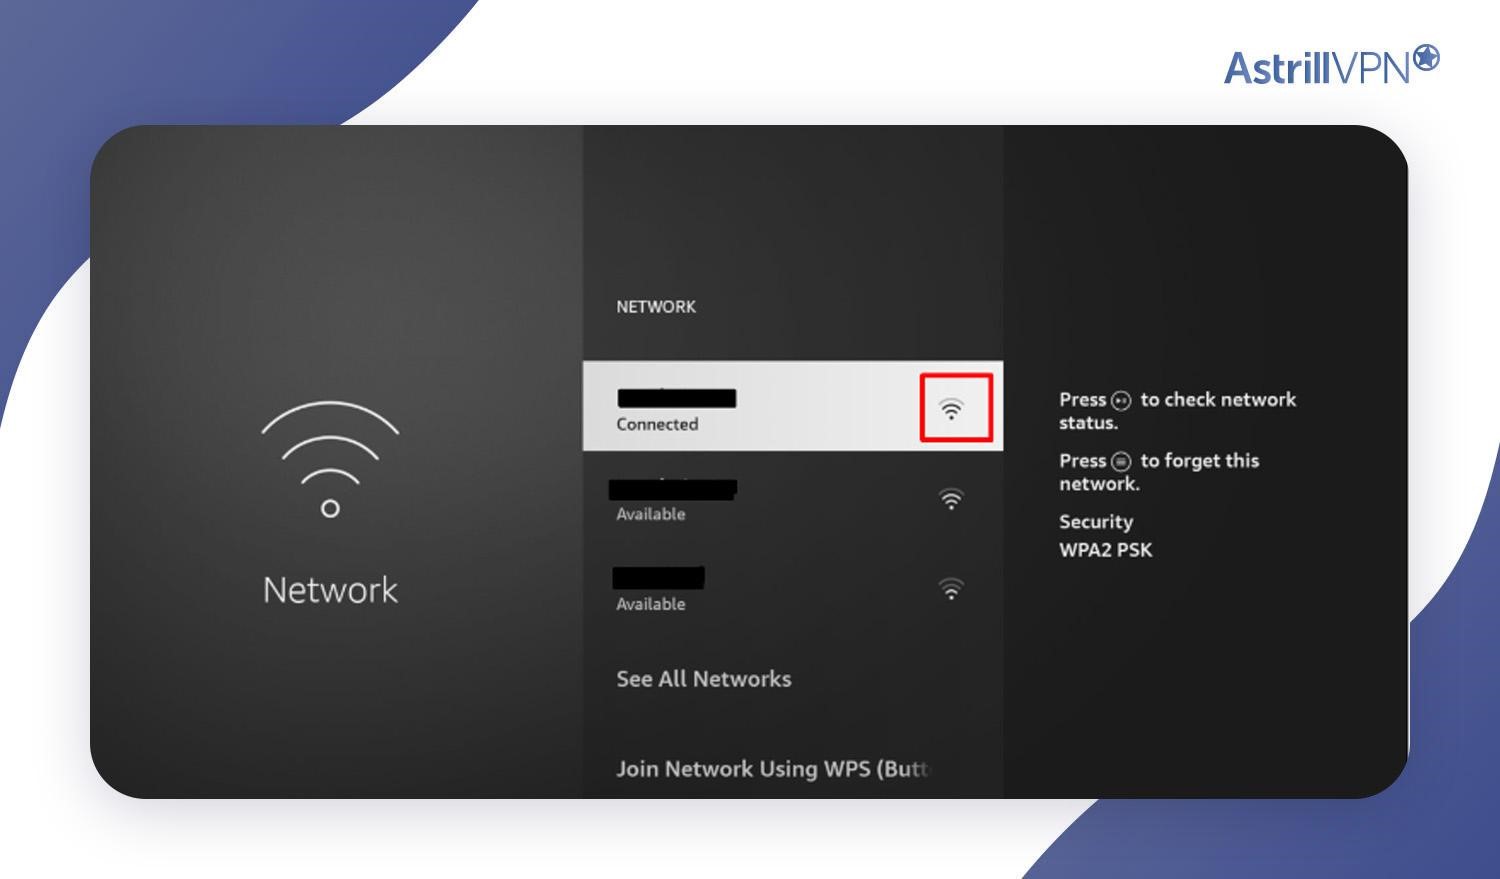 Choose your current network